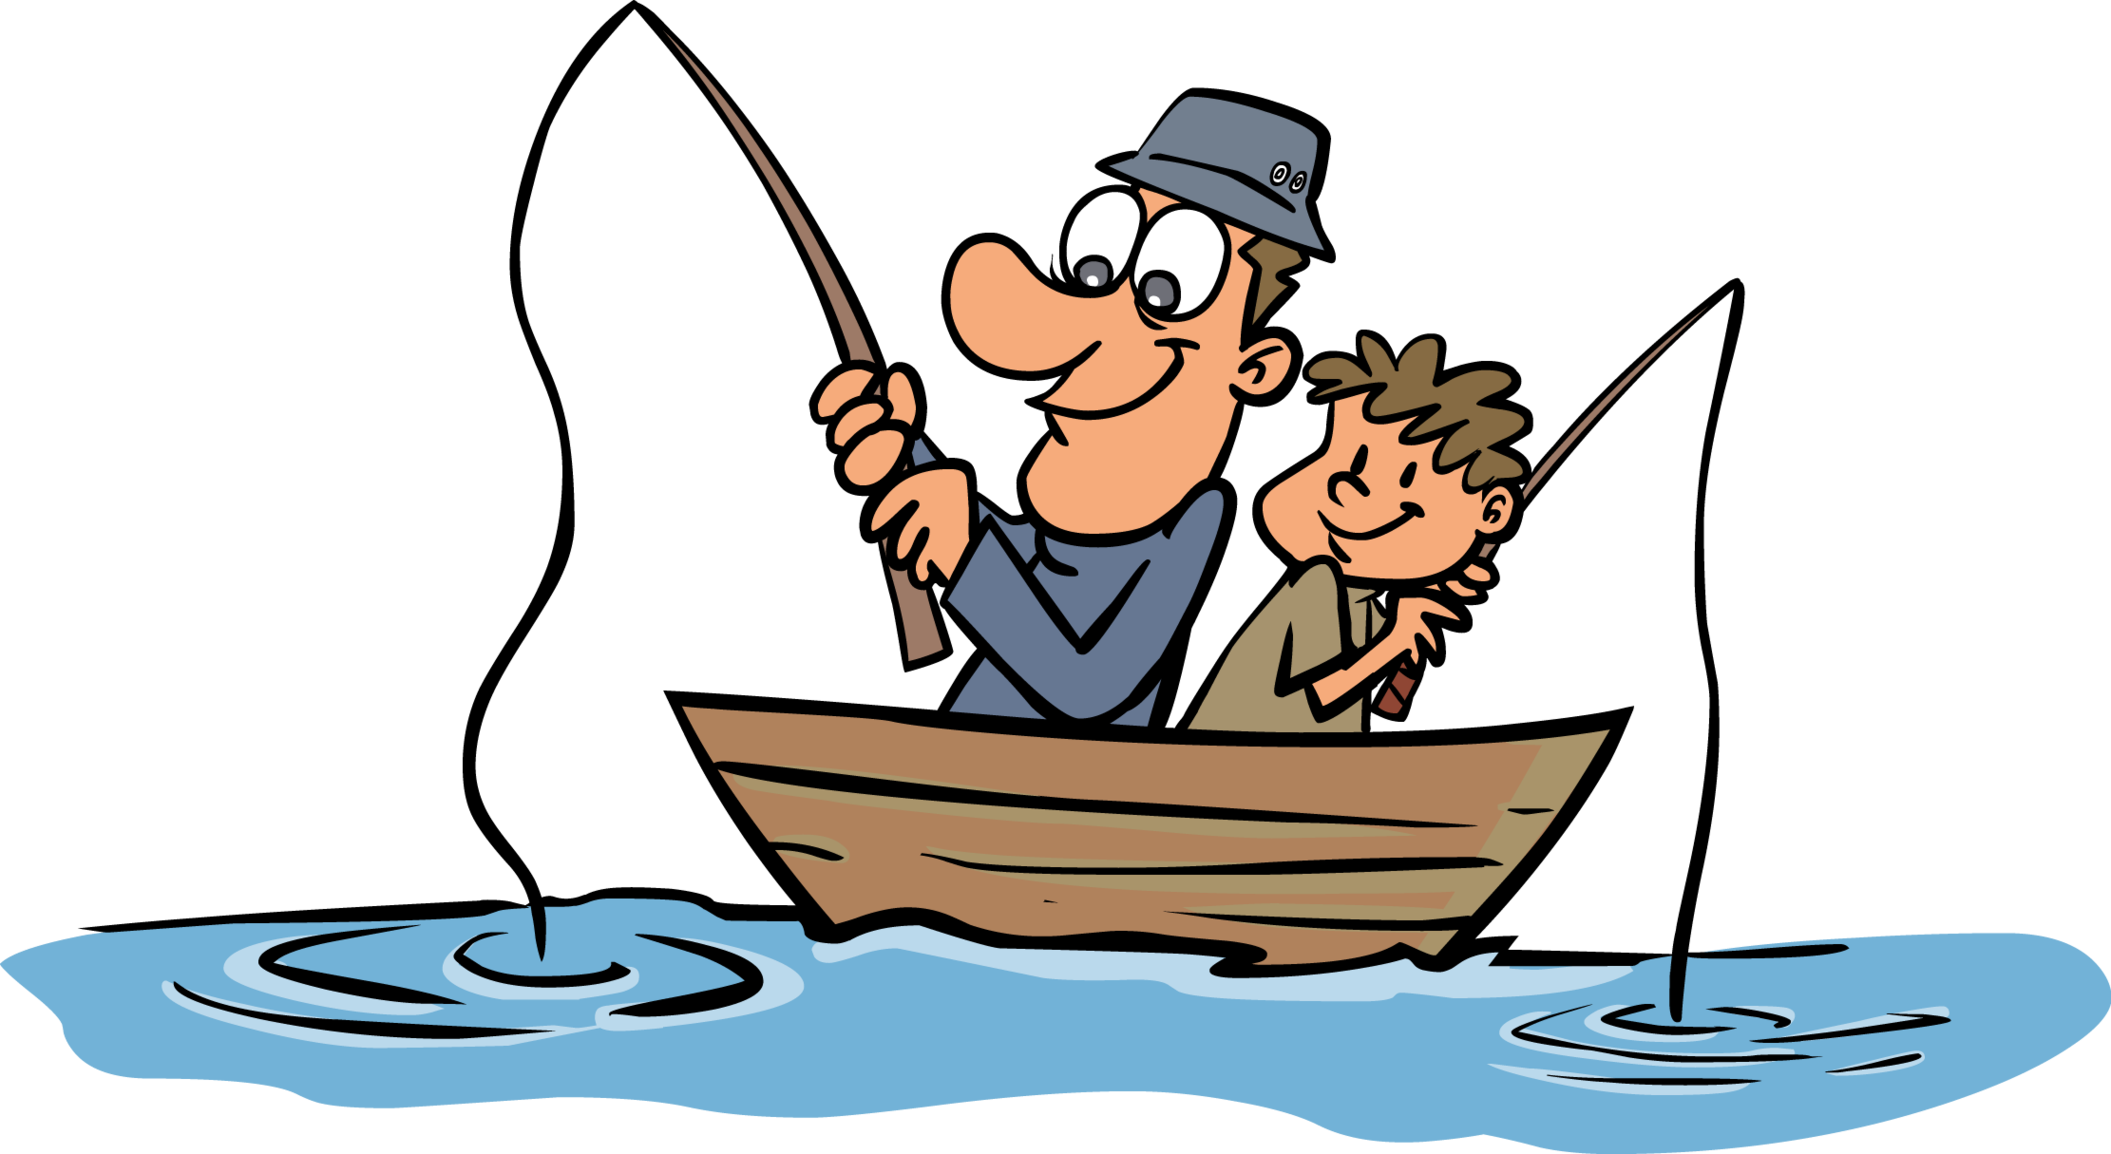 Funny Fisherman Cartoon Clipart - Free to use Clip Art Resource